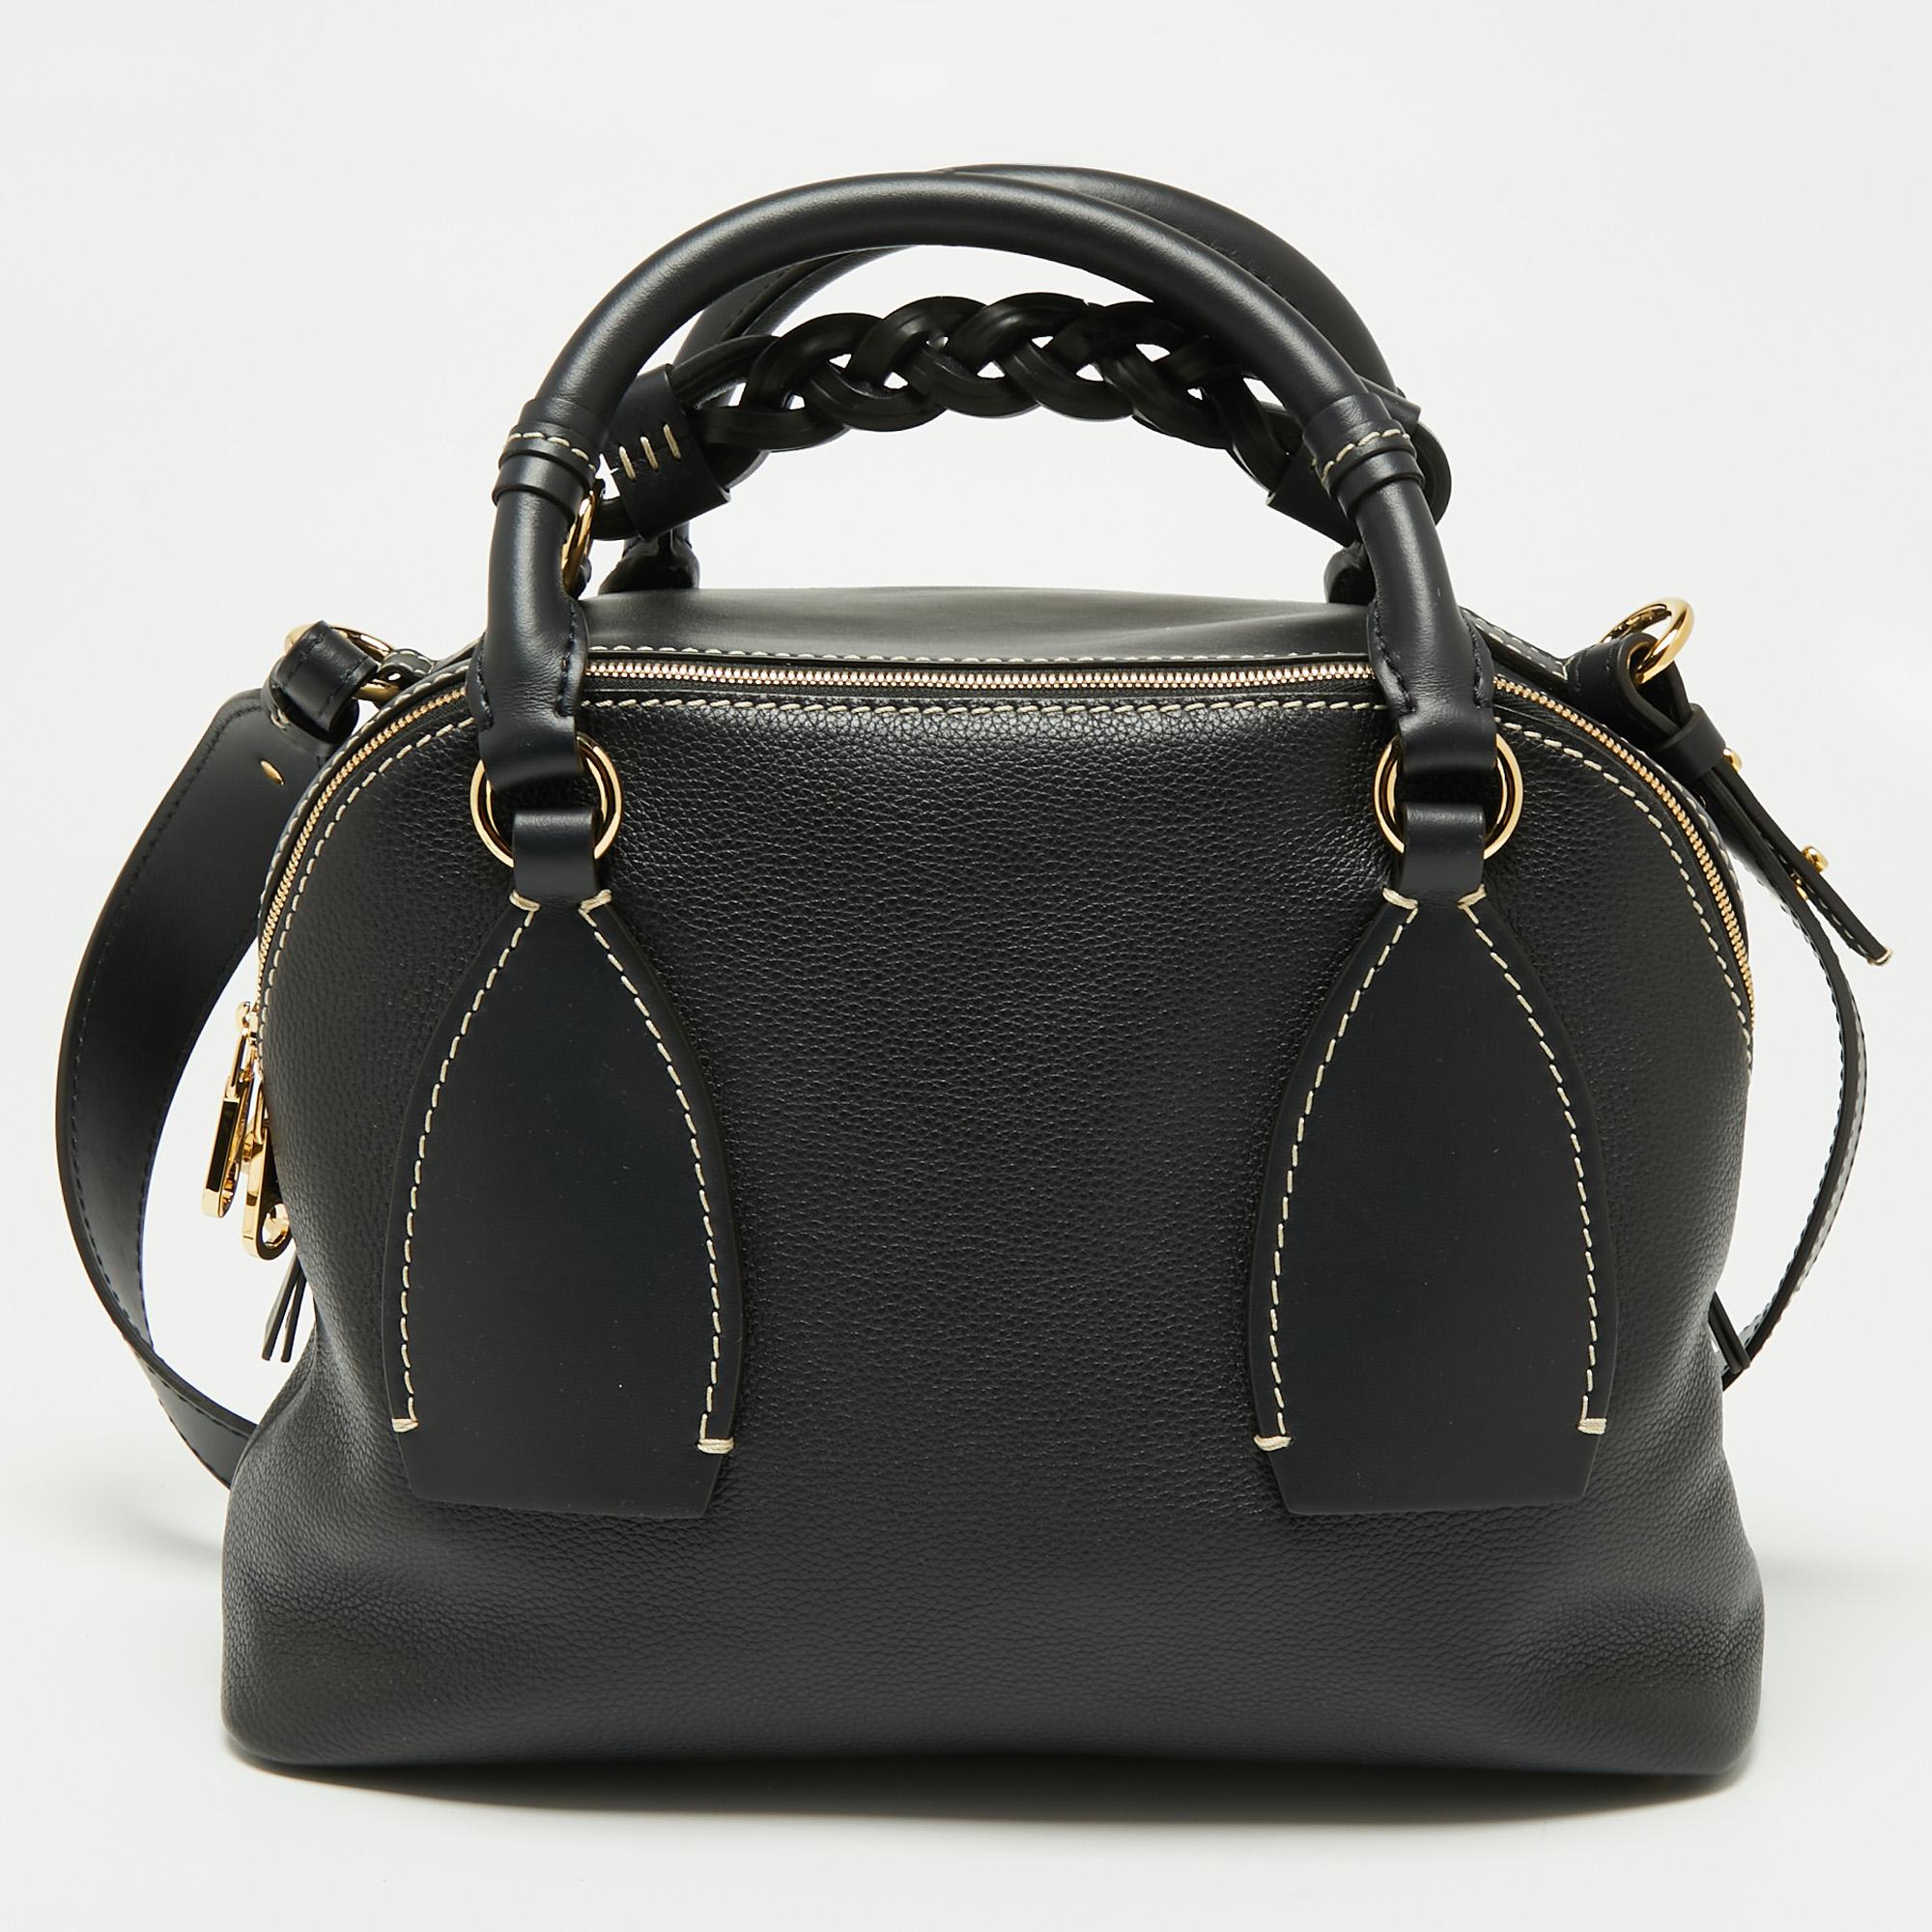 This Daria satchel from Chloe is designed in such an adorable style you will fall for it at the very first instant. It is made from black leather and it comes with dual top handles and opens to a well-sized fabric interior. A braided handle